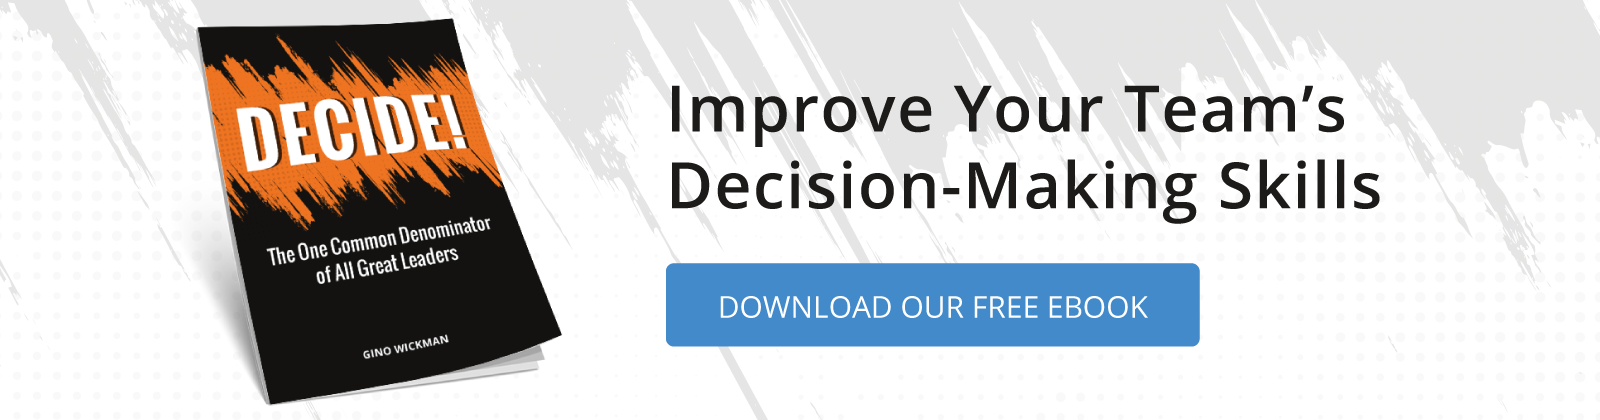 Improve your team's decision-making skills. Click here to download our free ebook: Decide.